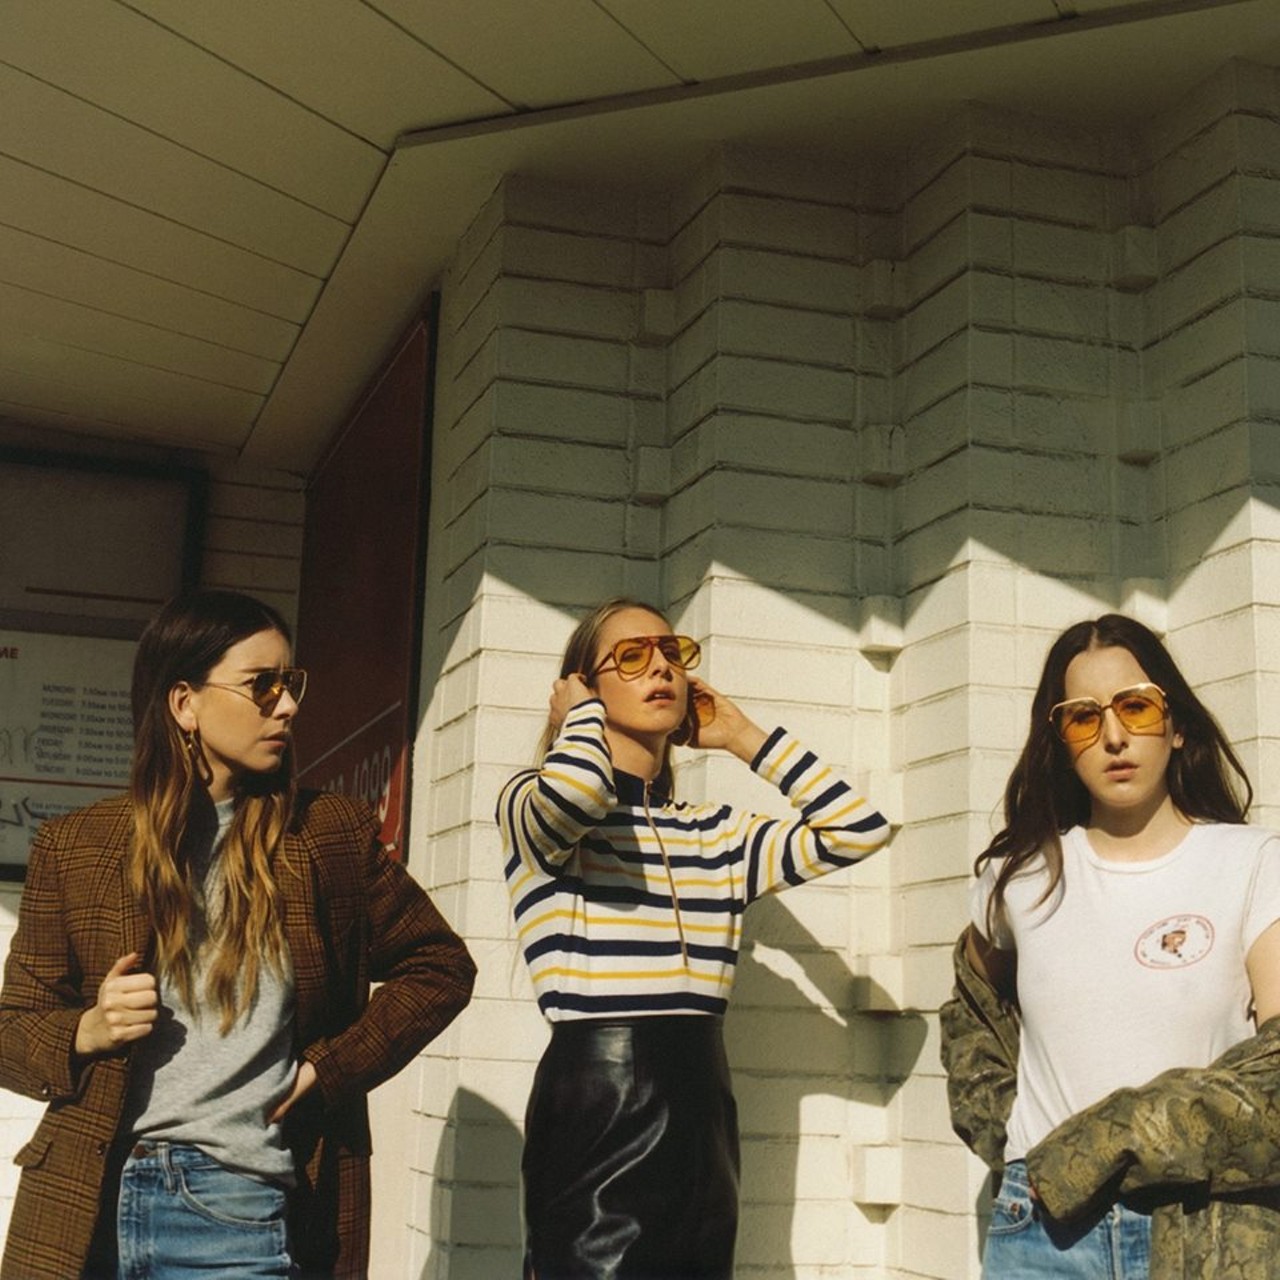 HAIM 
The Fillmore, May 8, 7 p.m., $35+
Haim will soon embark on their Sister Sister Sister Tour, rocking out all over Europe, the United Kingdom, and the United States. Catch these three L.A. sisters playing songs from Something To Tell You, their most recent album from 2017.
Photo via Facebook